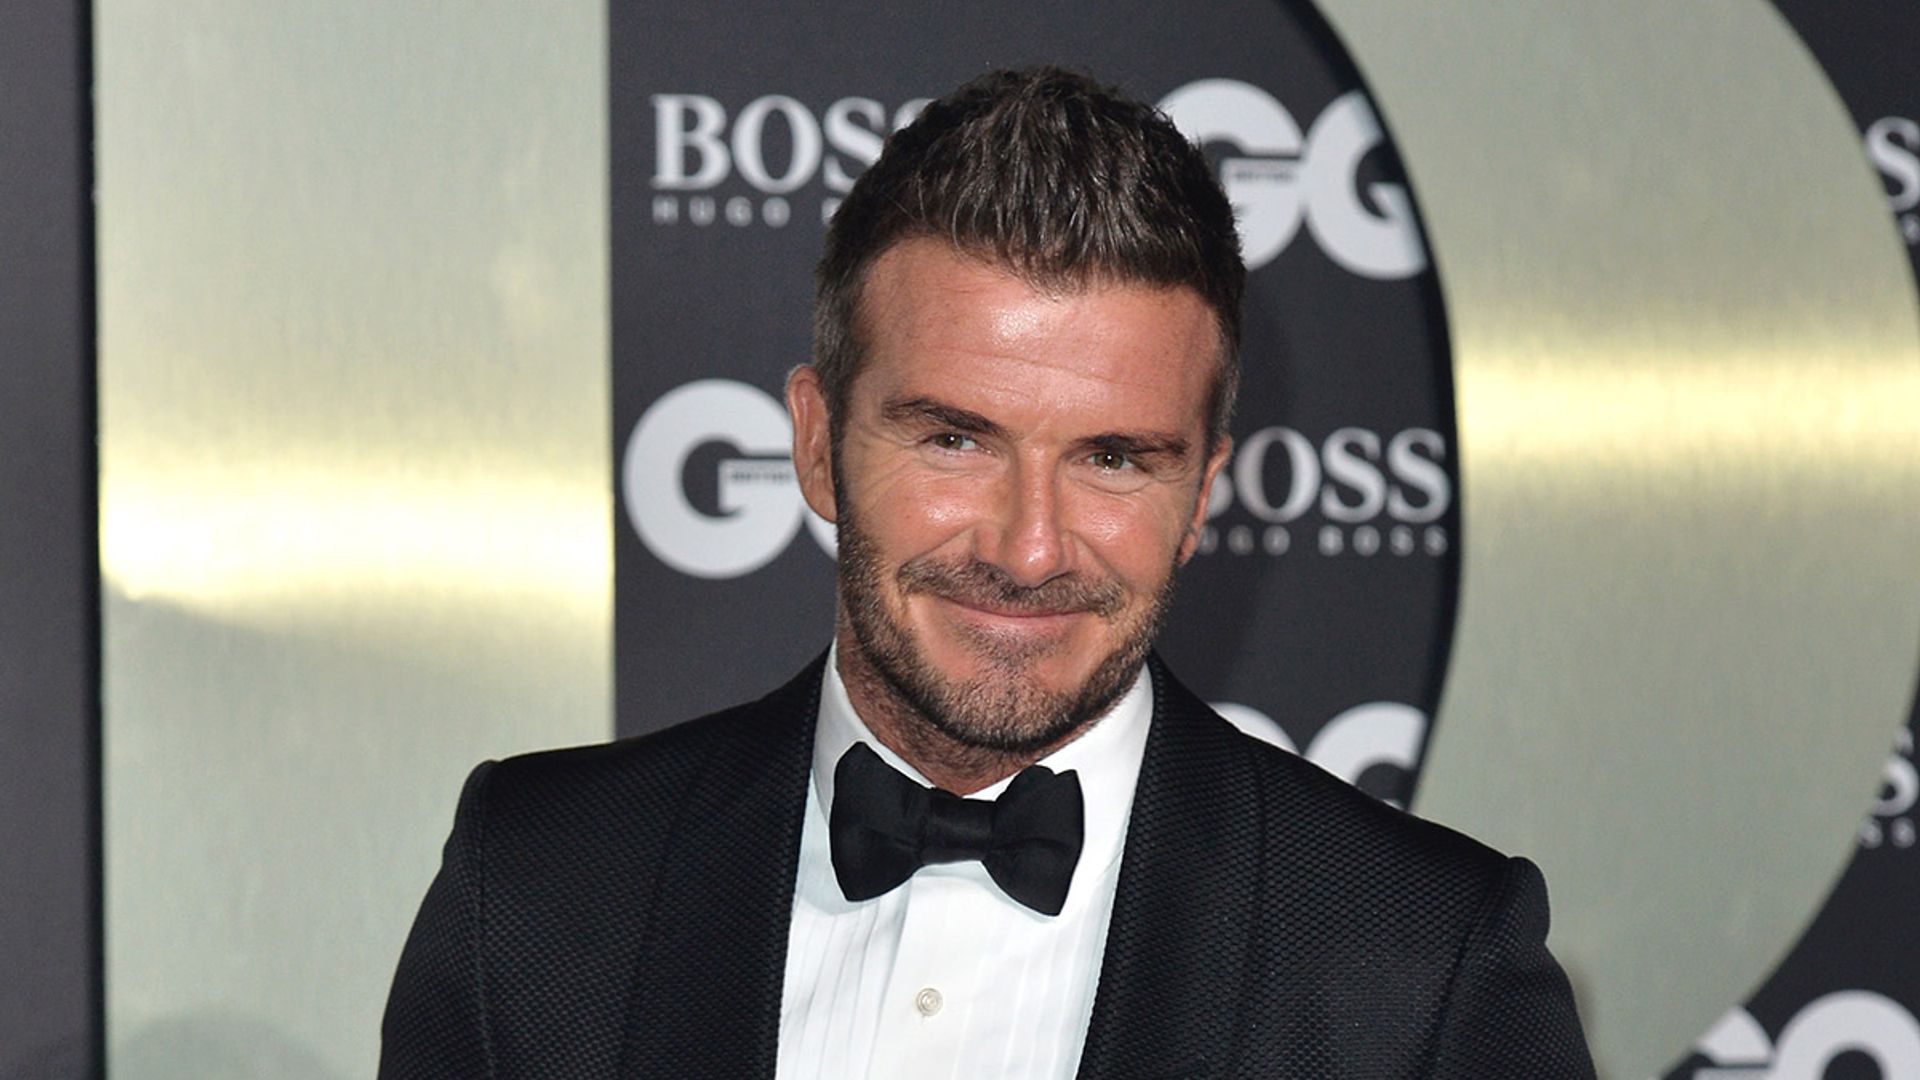 David Beckham Freaks Out After His Idol Gives Him A Cuddle Hello 